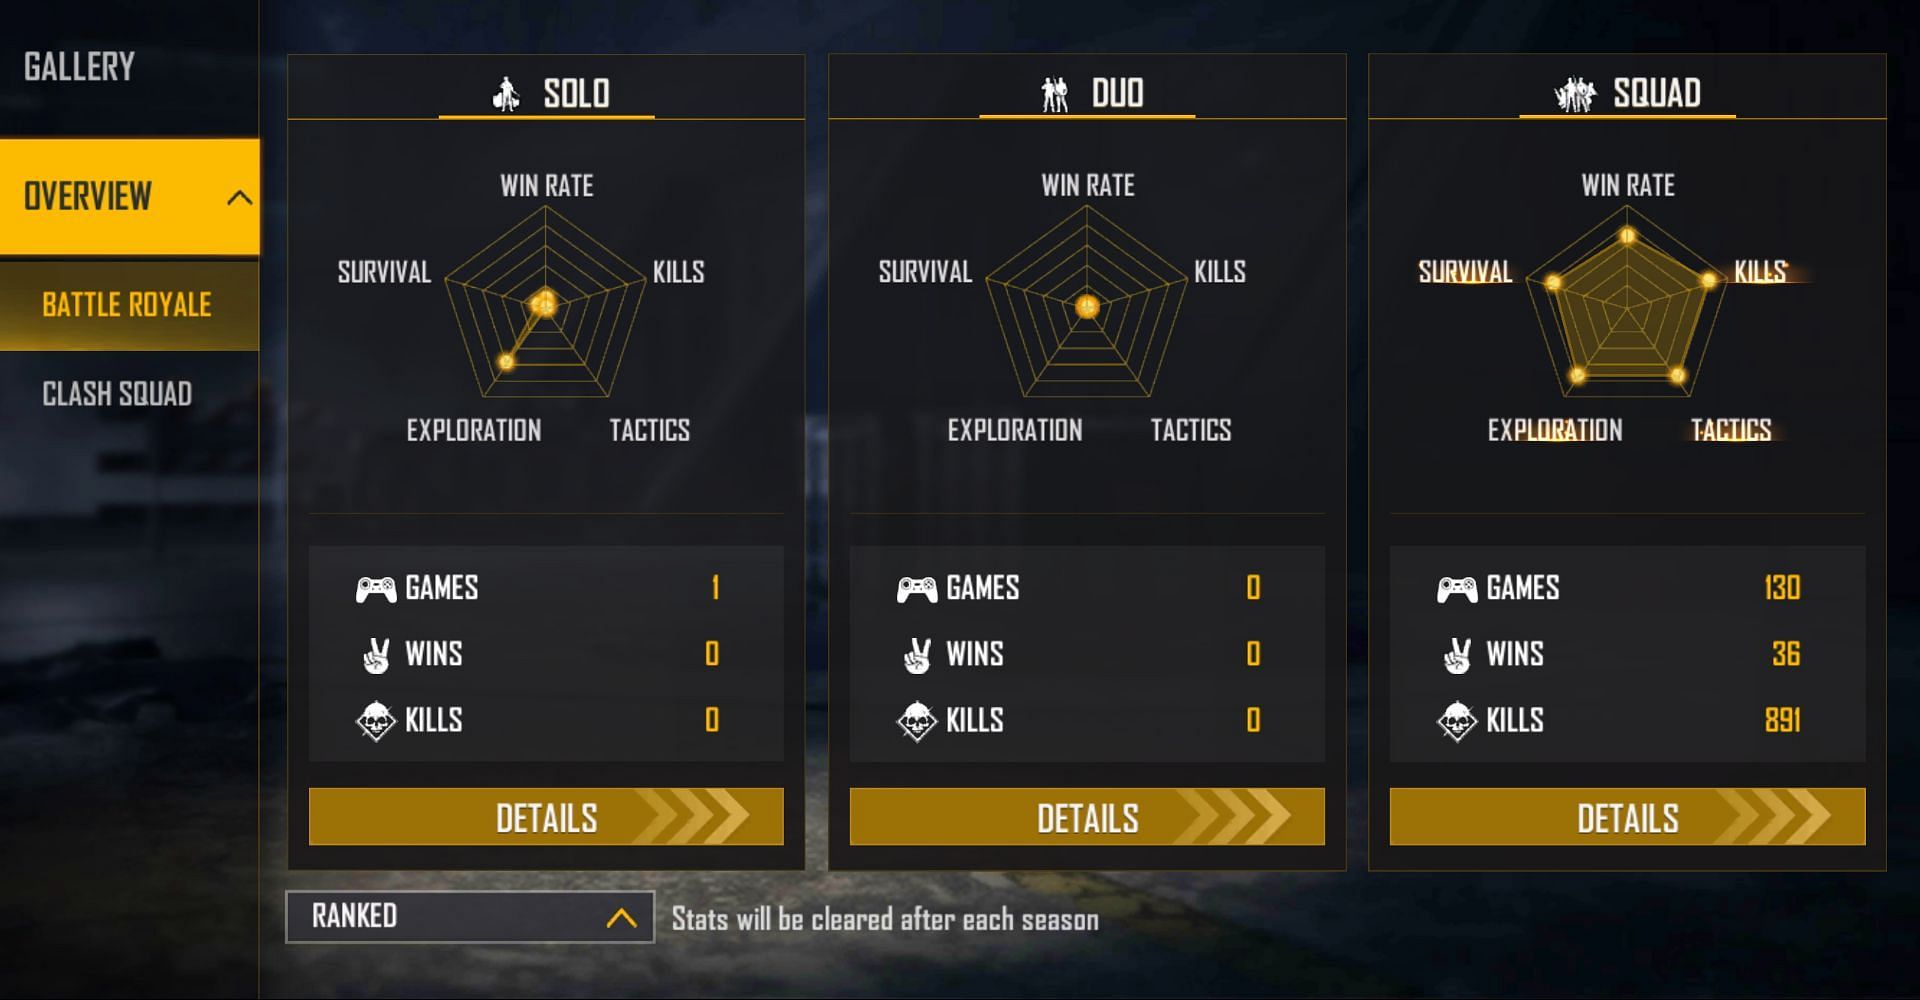 TG Delete has not played solo and duo games (Image via Free Fire)